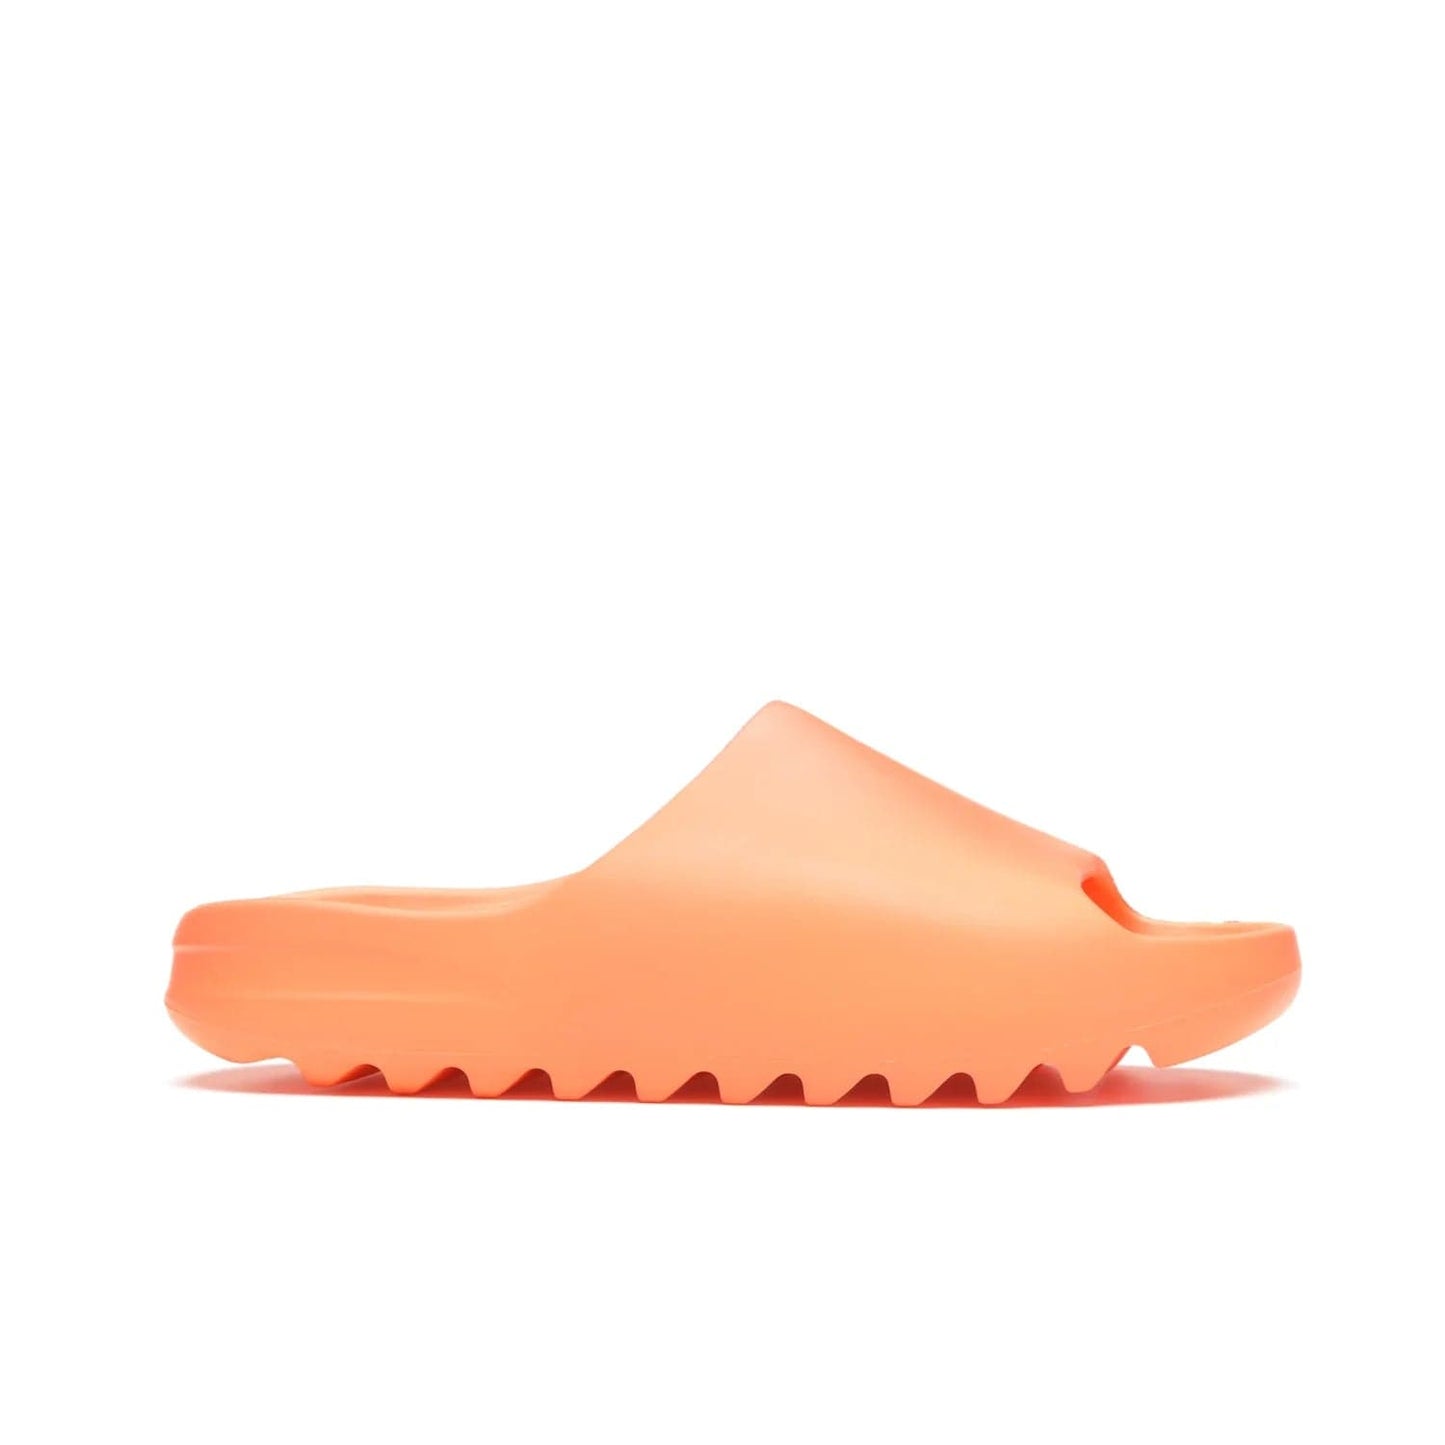 adidas Yeezy Slide Enflame Orange - Image 2 - Only at www.BallersClubKickz.com - Limited edition adidas Yeezy Slide featuring a bold Enflame Orange upper and EVA foam construction. Grooved outsole for traction and support. Released June 2021. Perfect for summer.